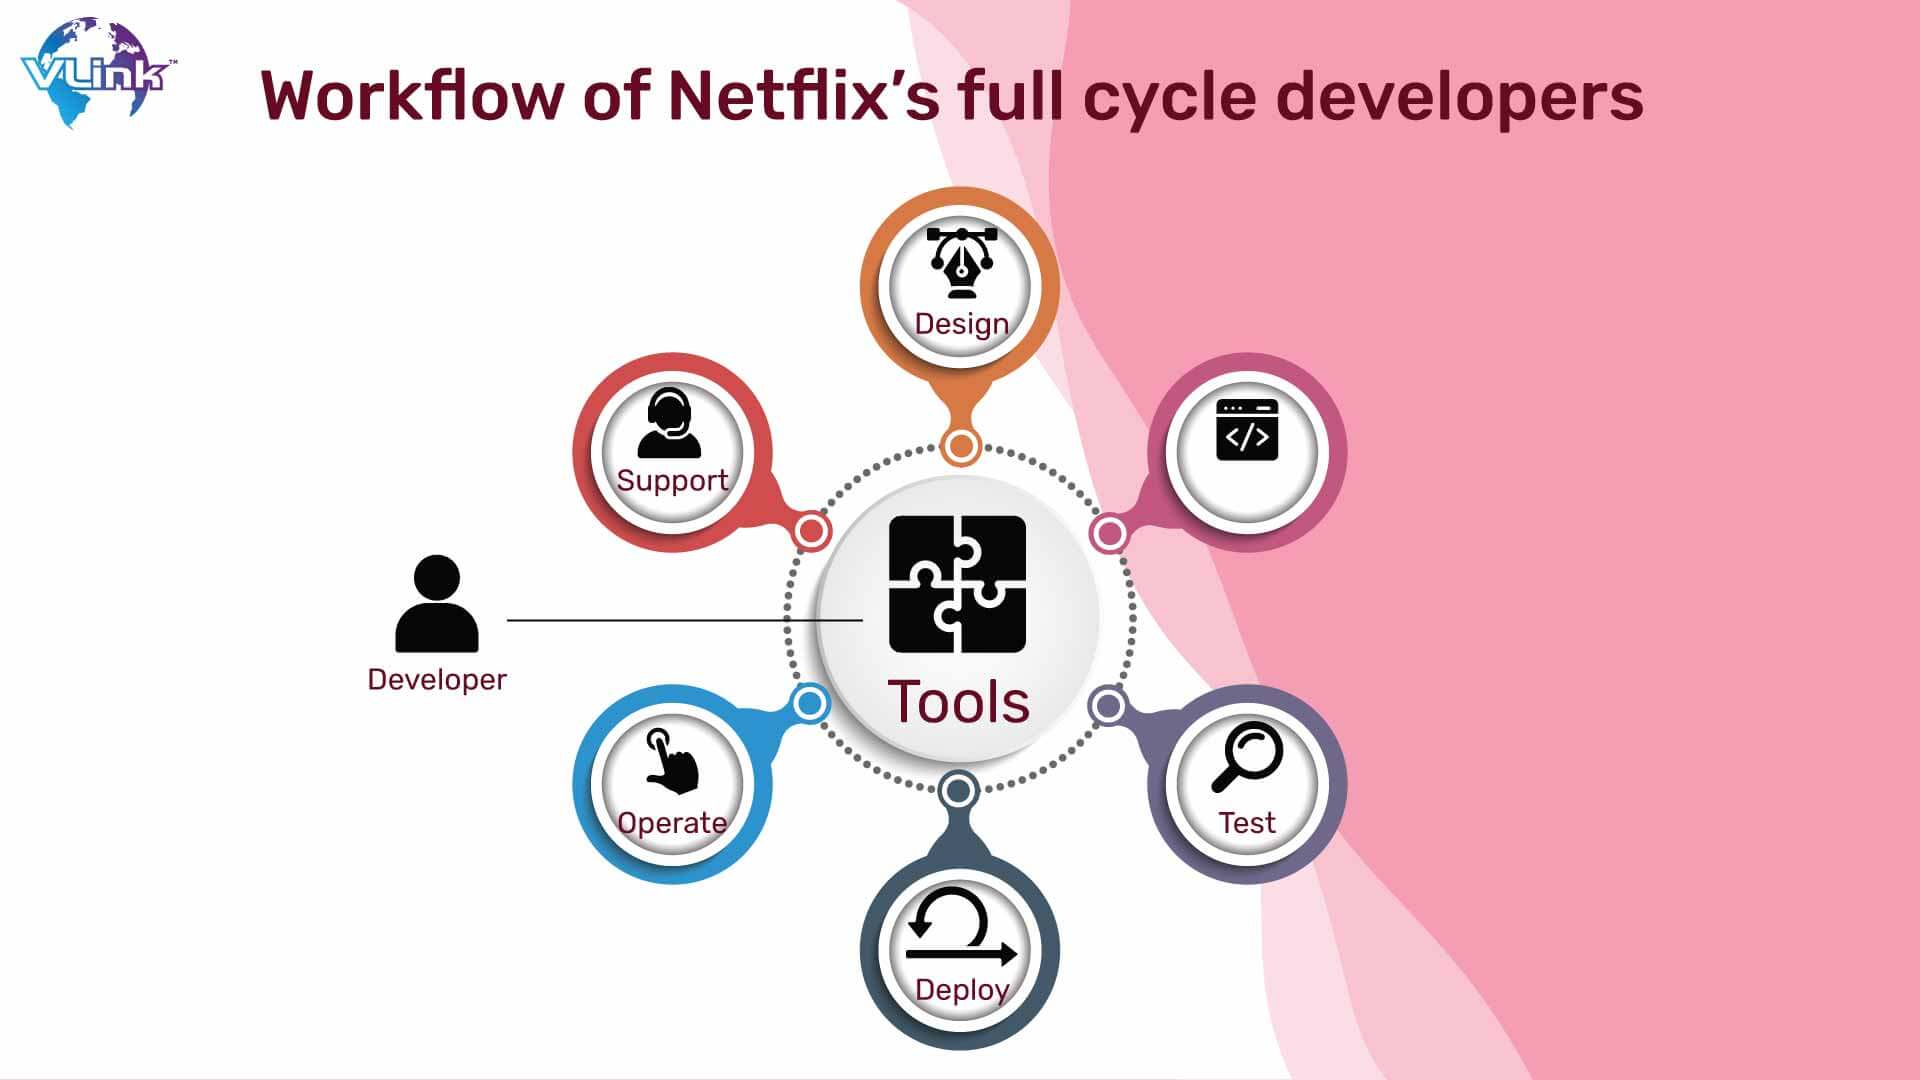 Workflow of Netflix’s full cycle developers